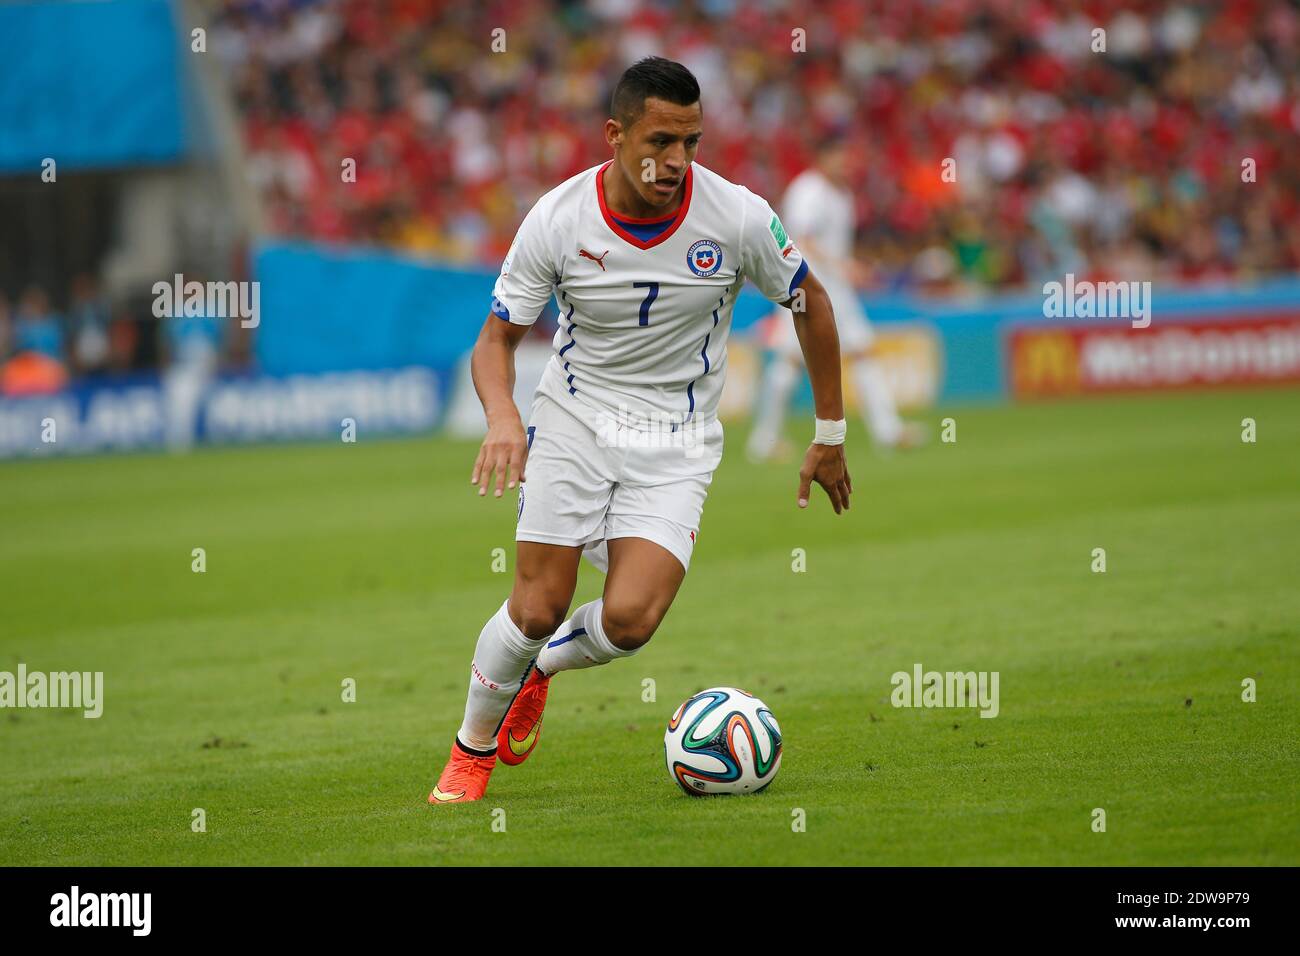 Alexis Sanchez Chile during Soccer World Cup 2014 First round Group B match Spain v Chile at Maracana Stadium, Rio de Janeiro, Brazil , on June 18, 2014. Chile won 2-0 and ousted the defending champions from the competition. Photo by Giuliano Bevilacqua/ABACAPRESS.COM Stock Photo